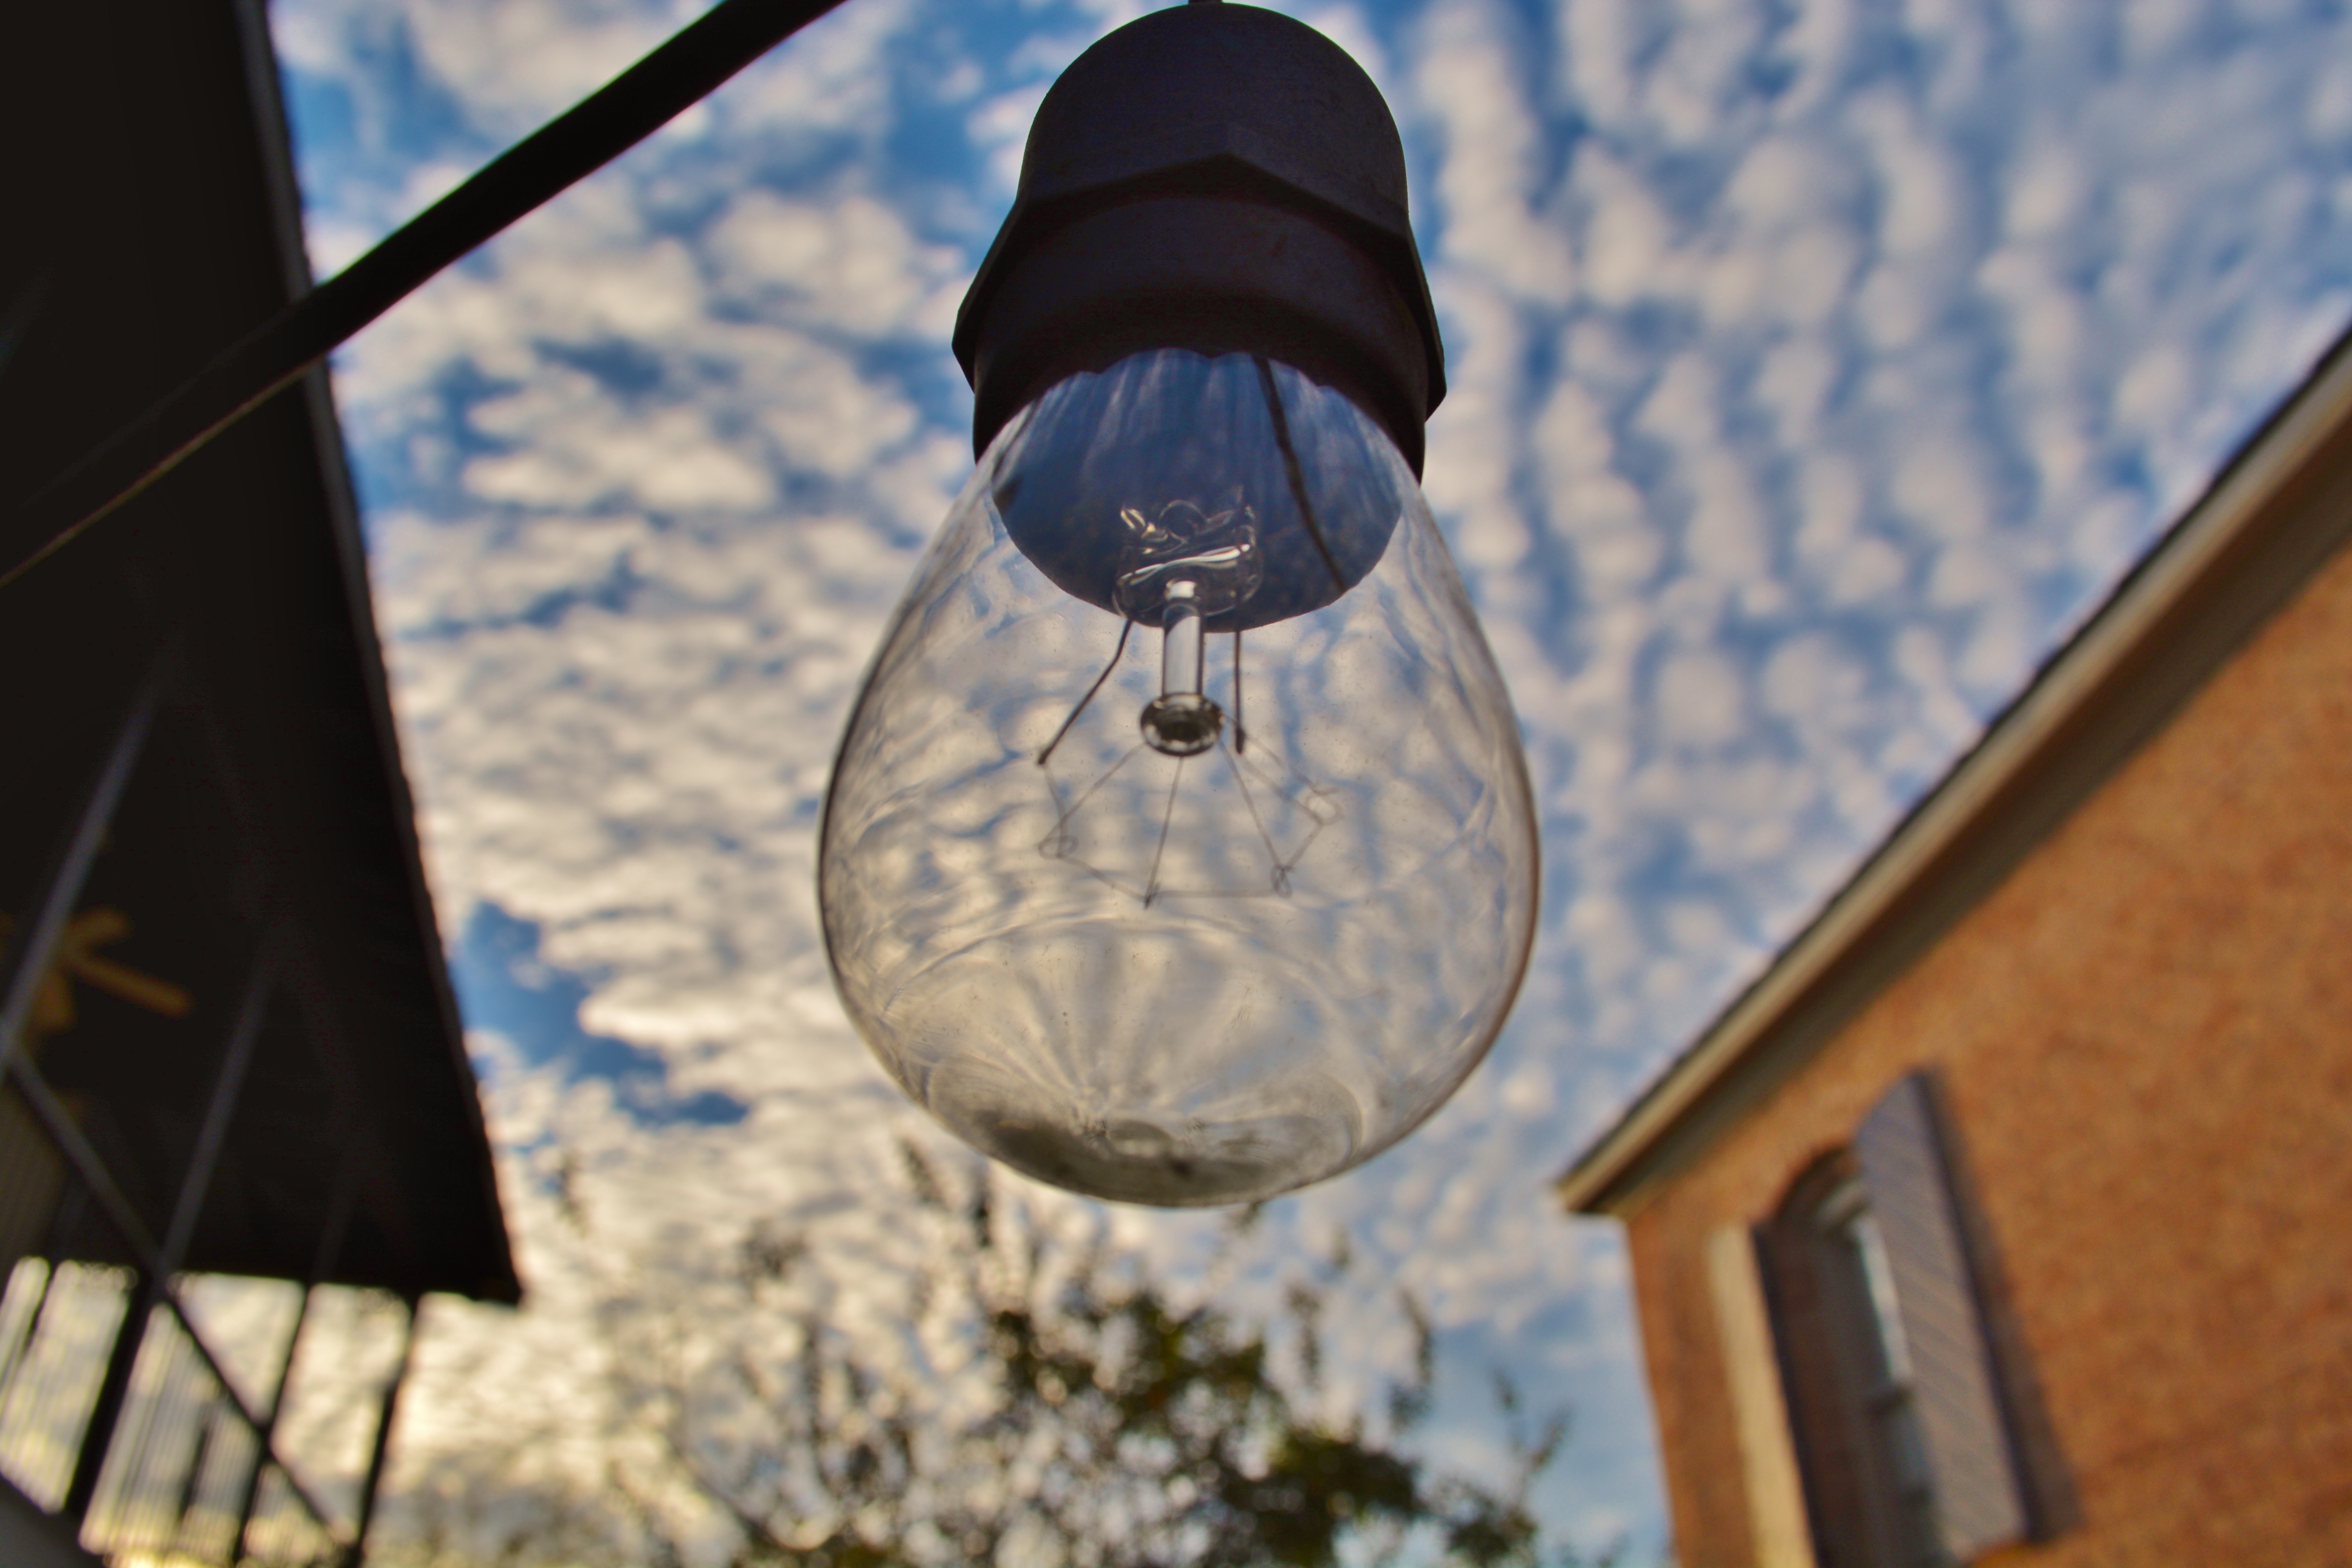 “Glass Bulb Sunset” was submitted by Cici Photography, taken in downtown Covington, LA.